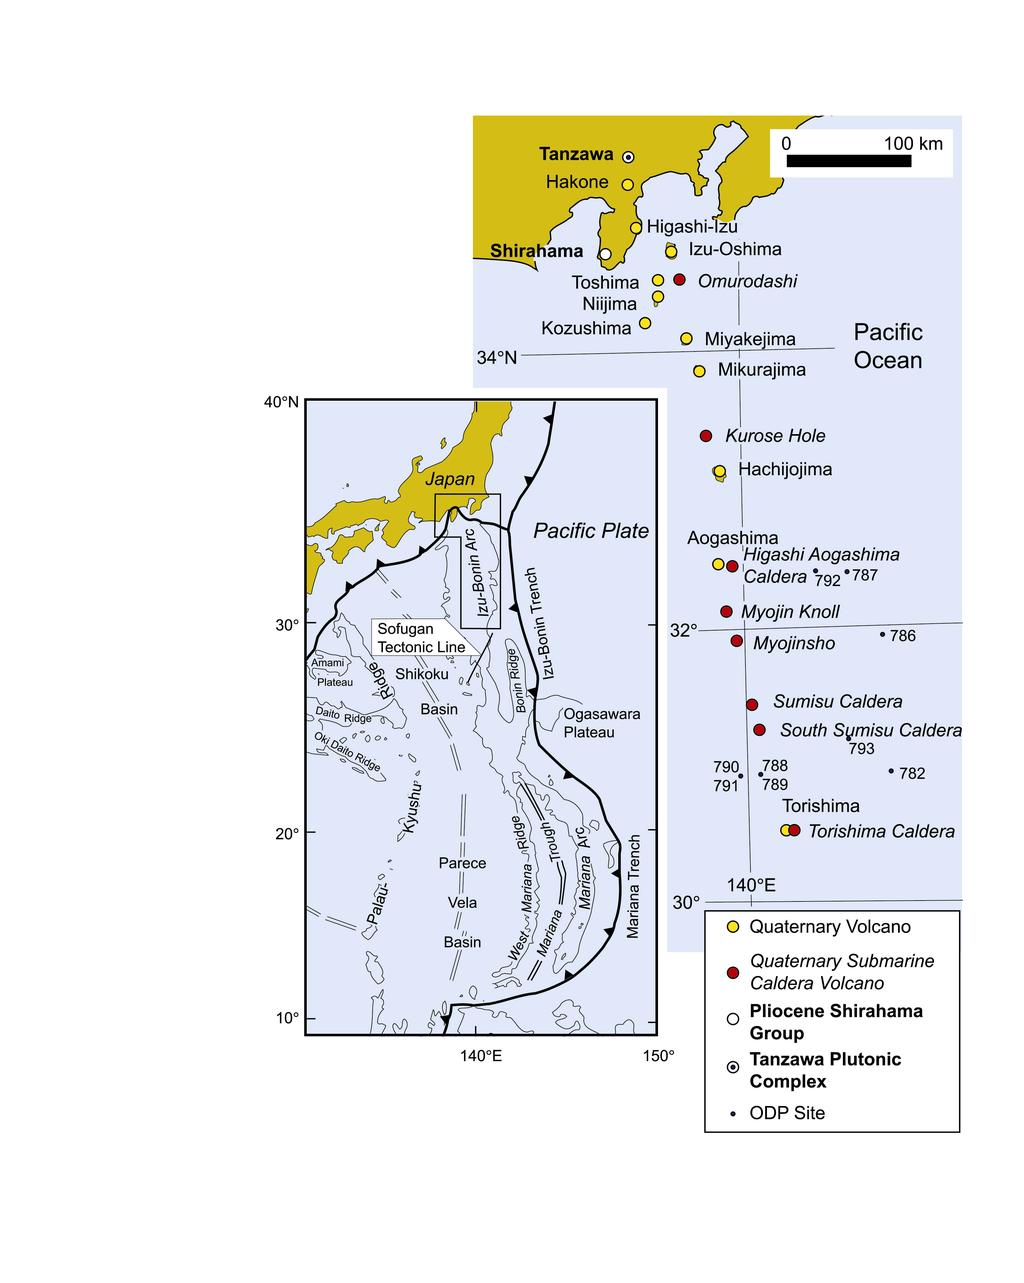 Fig. 1 Map showing the 11 Quaternary volcanoes, 8 Quaternary submarine caldera volcanoes with which this study is concerned and the location of the Mio-Pliocene Shirahama Group and the Miocene